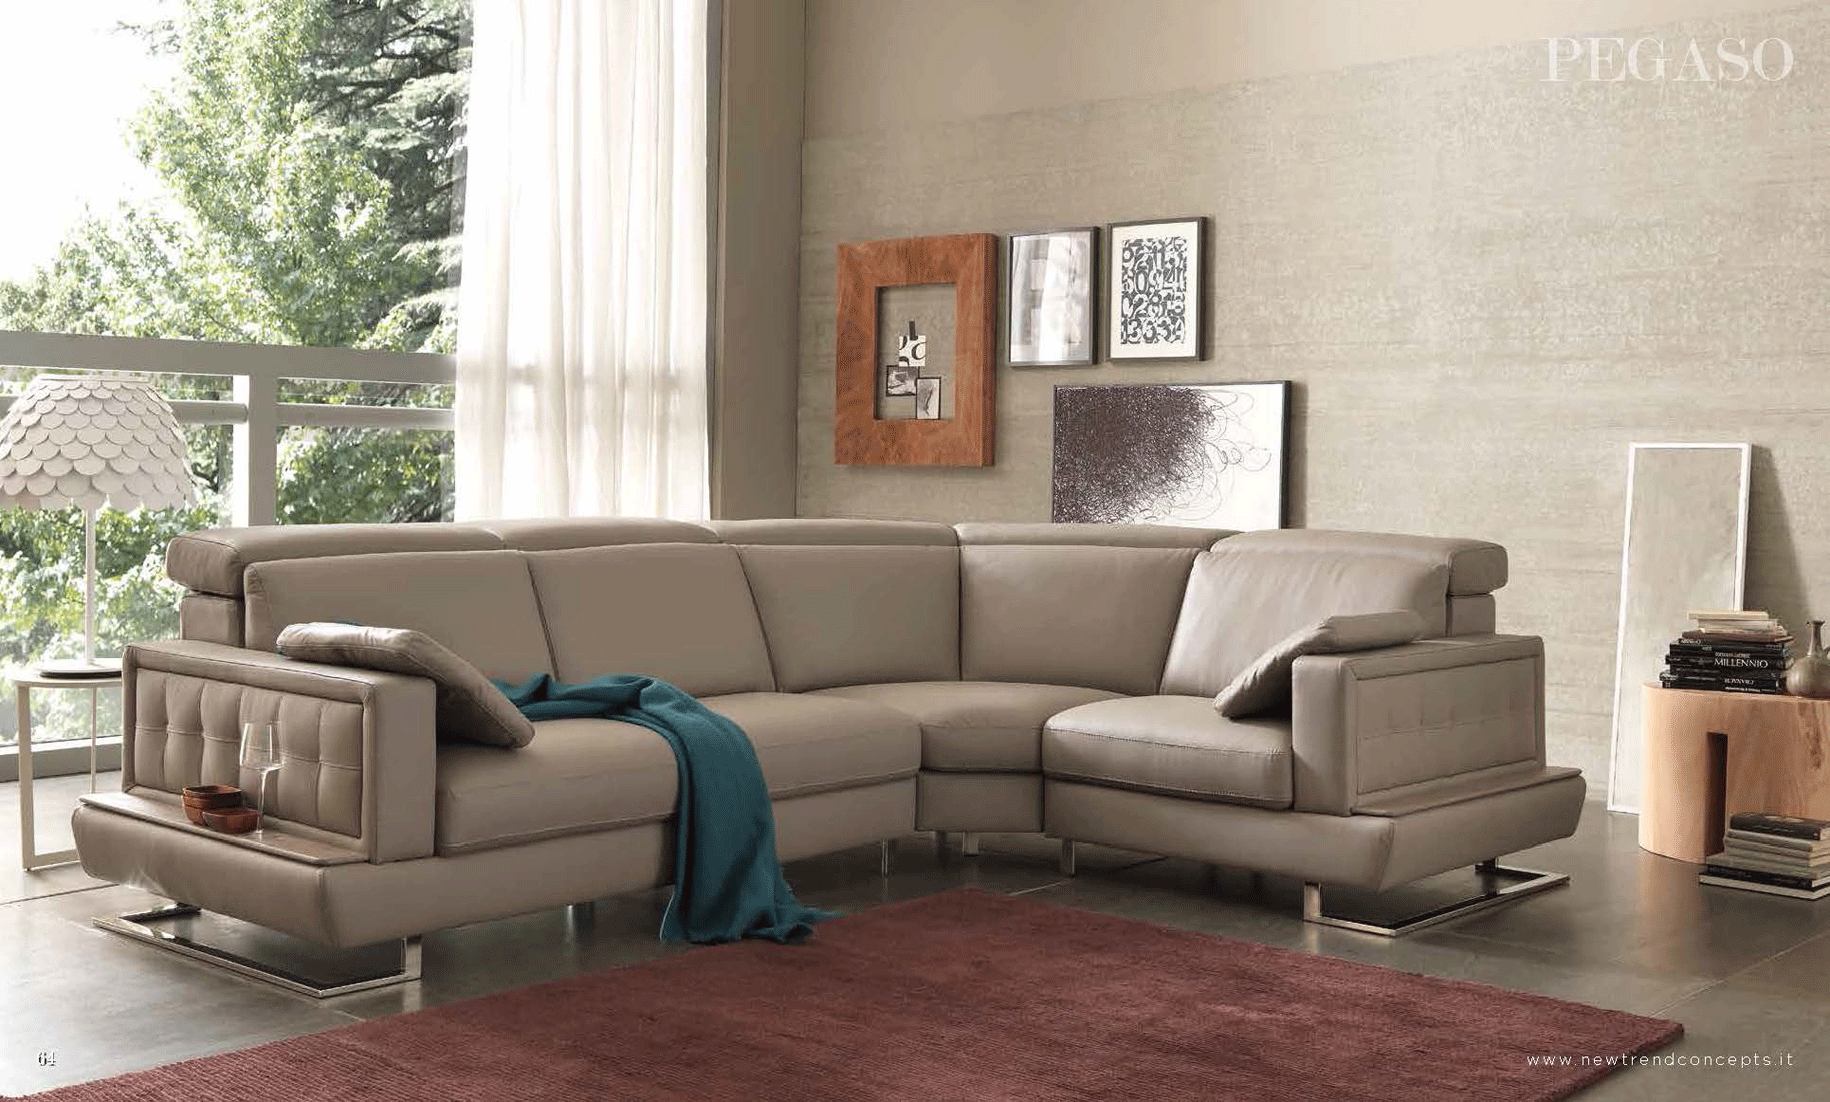 Brands New Trend Concepts Urban Living Room Collection Pegaso